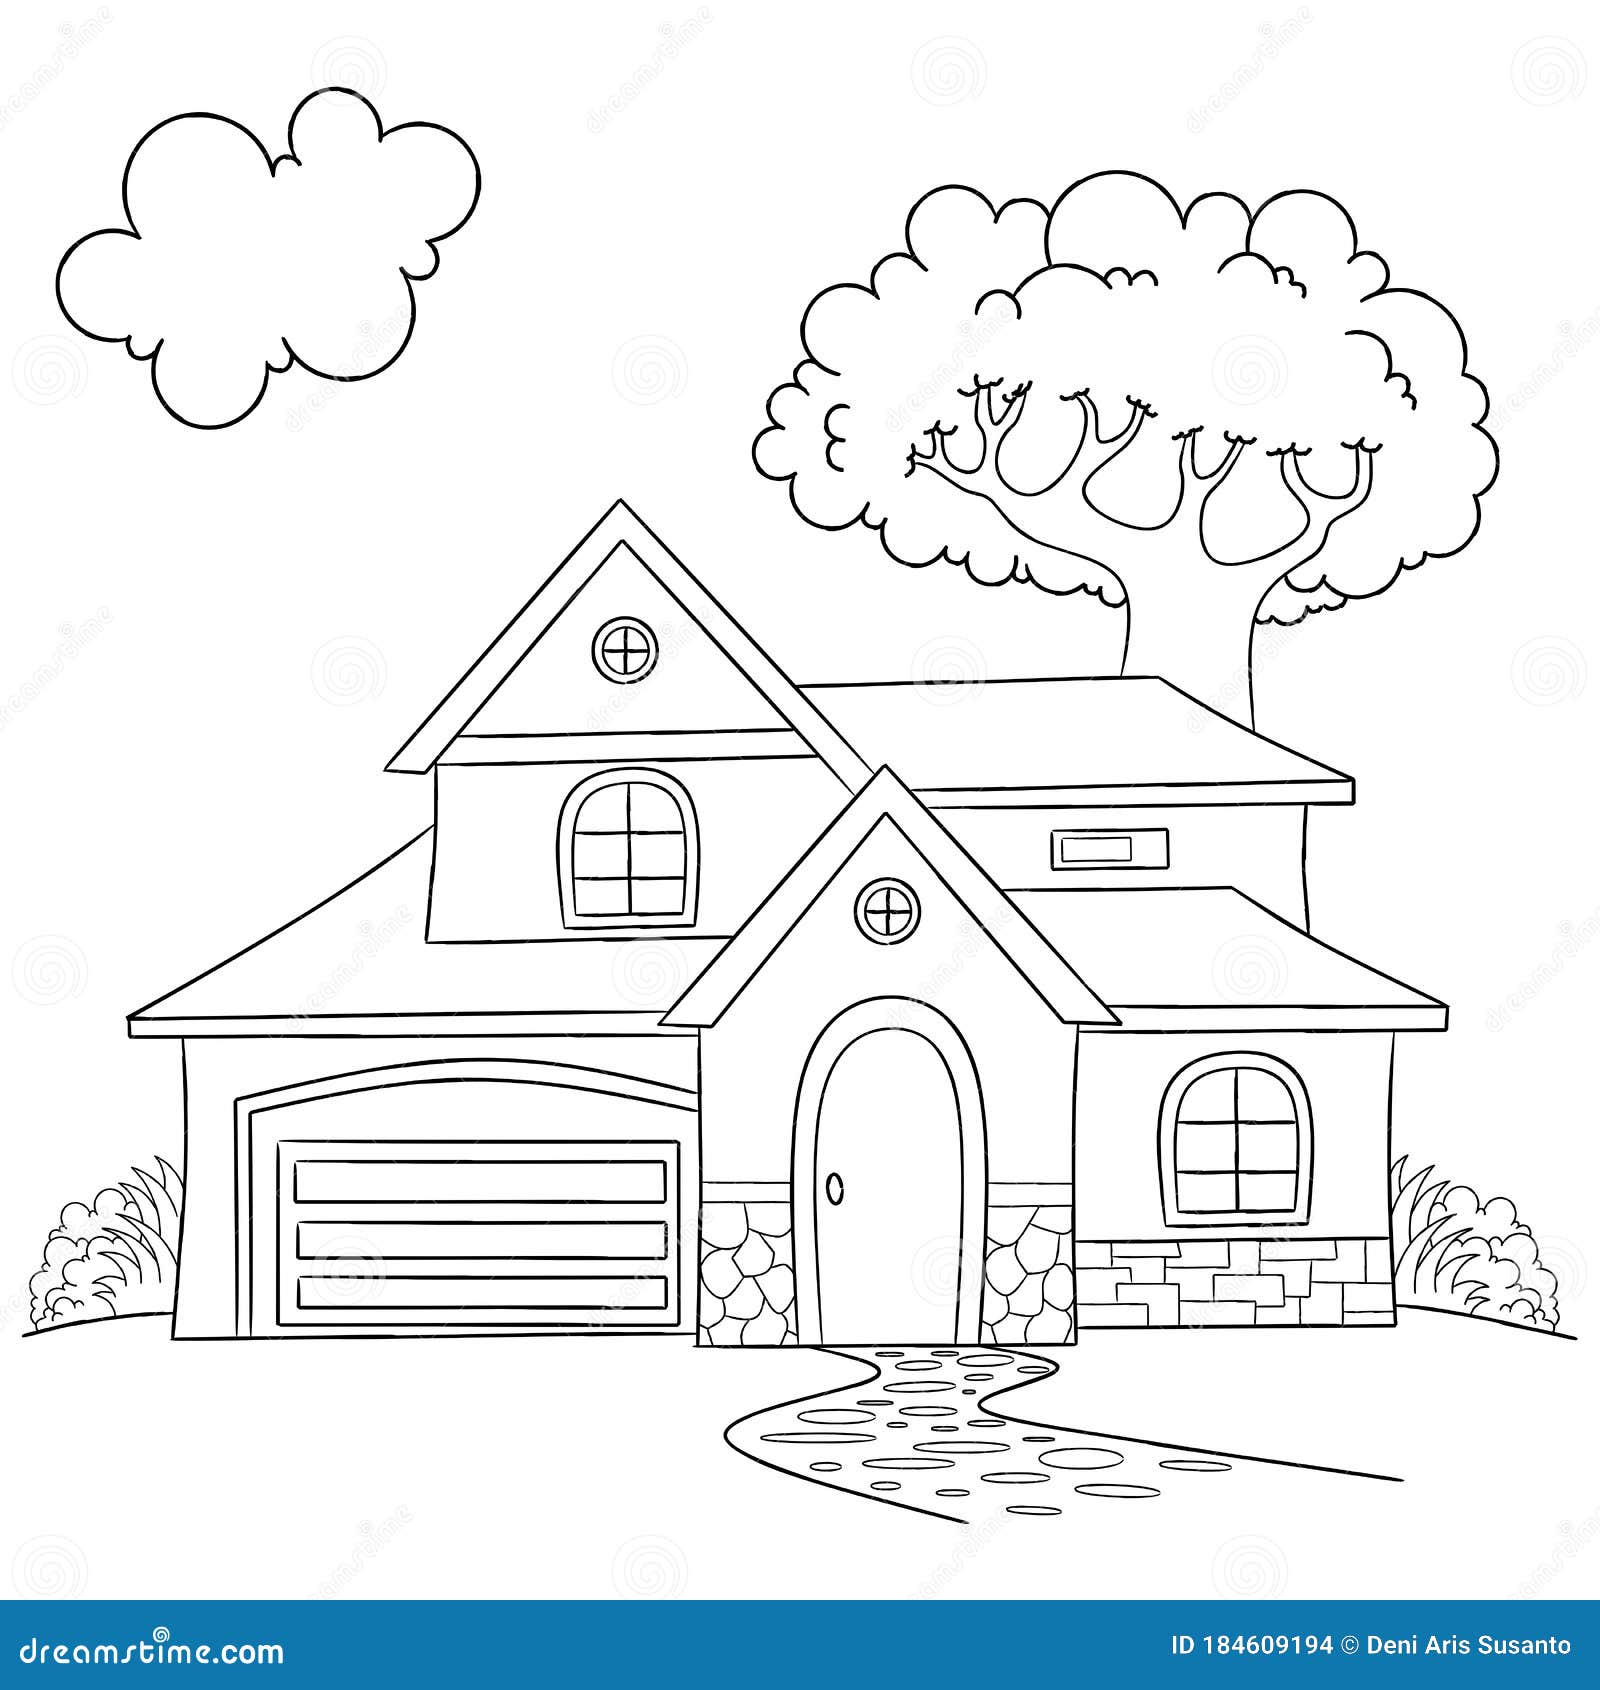 House Coloring Page, Useful As Coloring Book for Kids Stock Vector ...